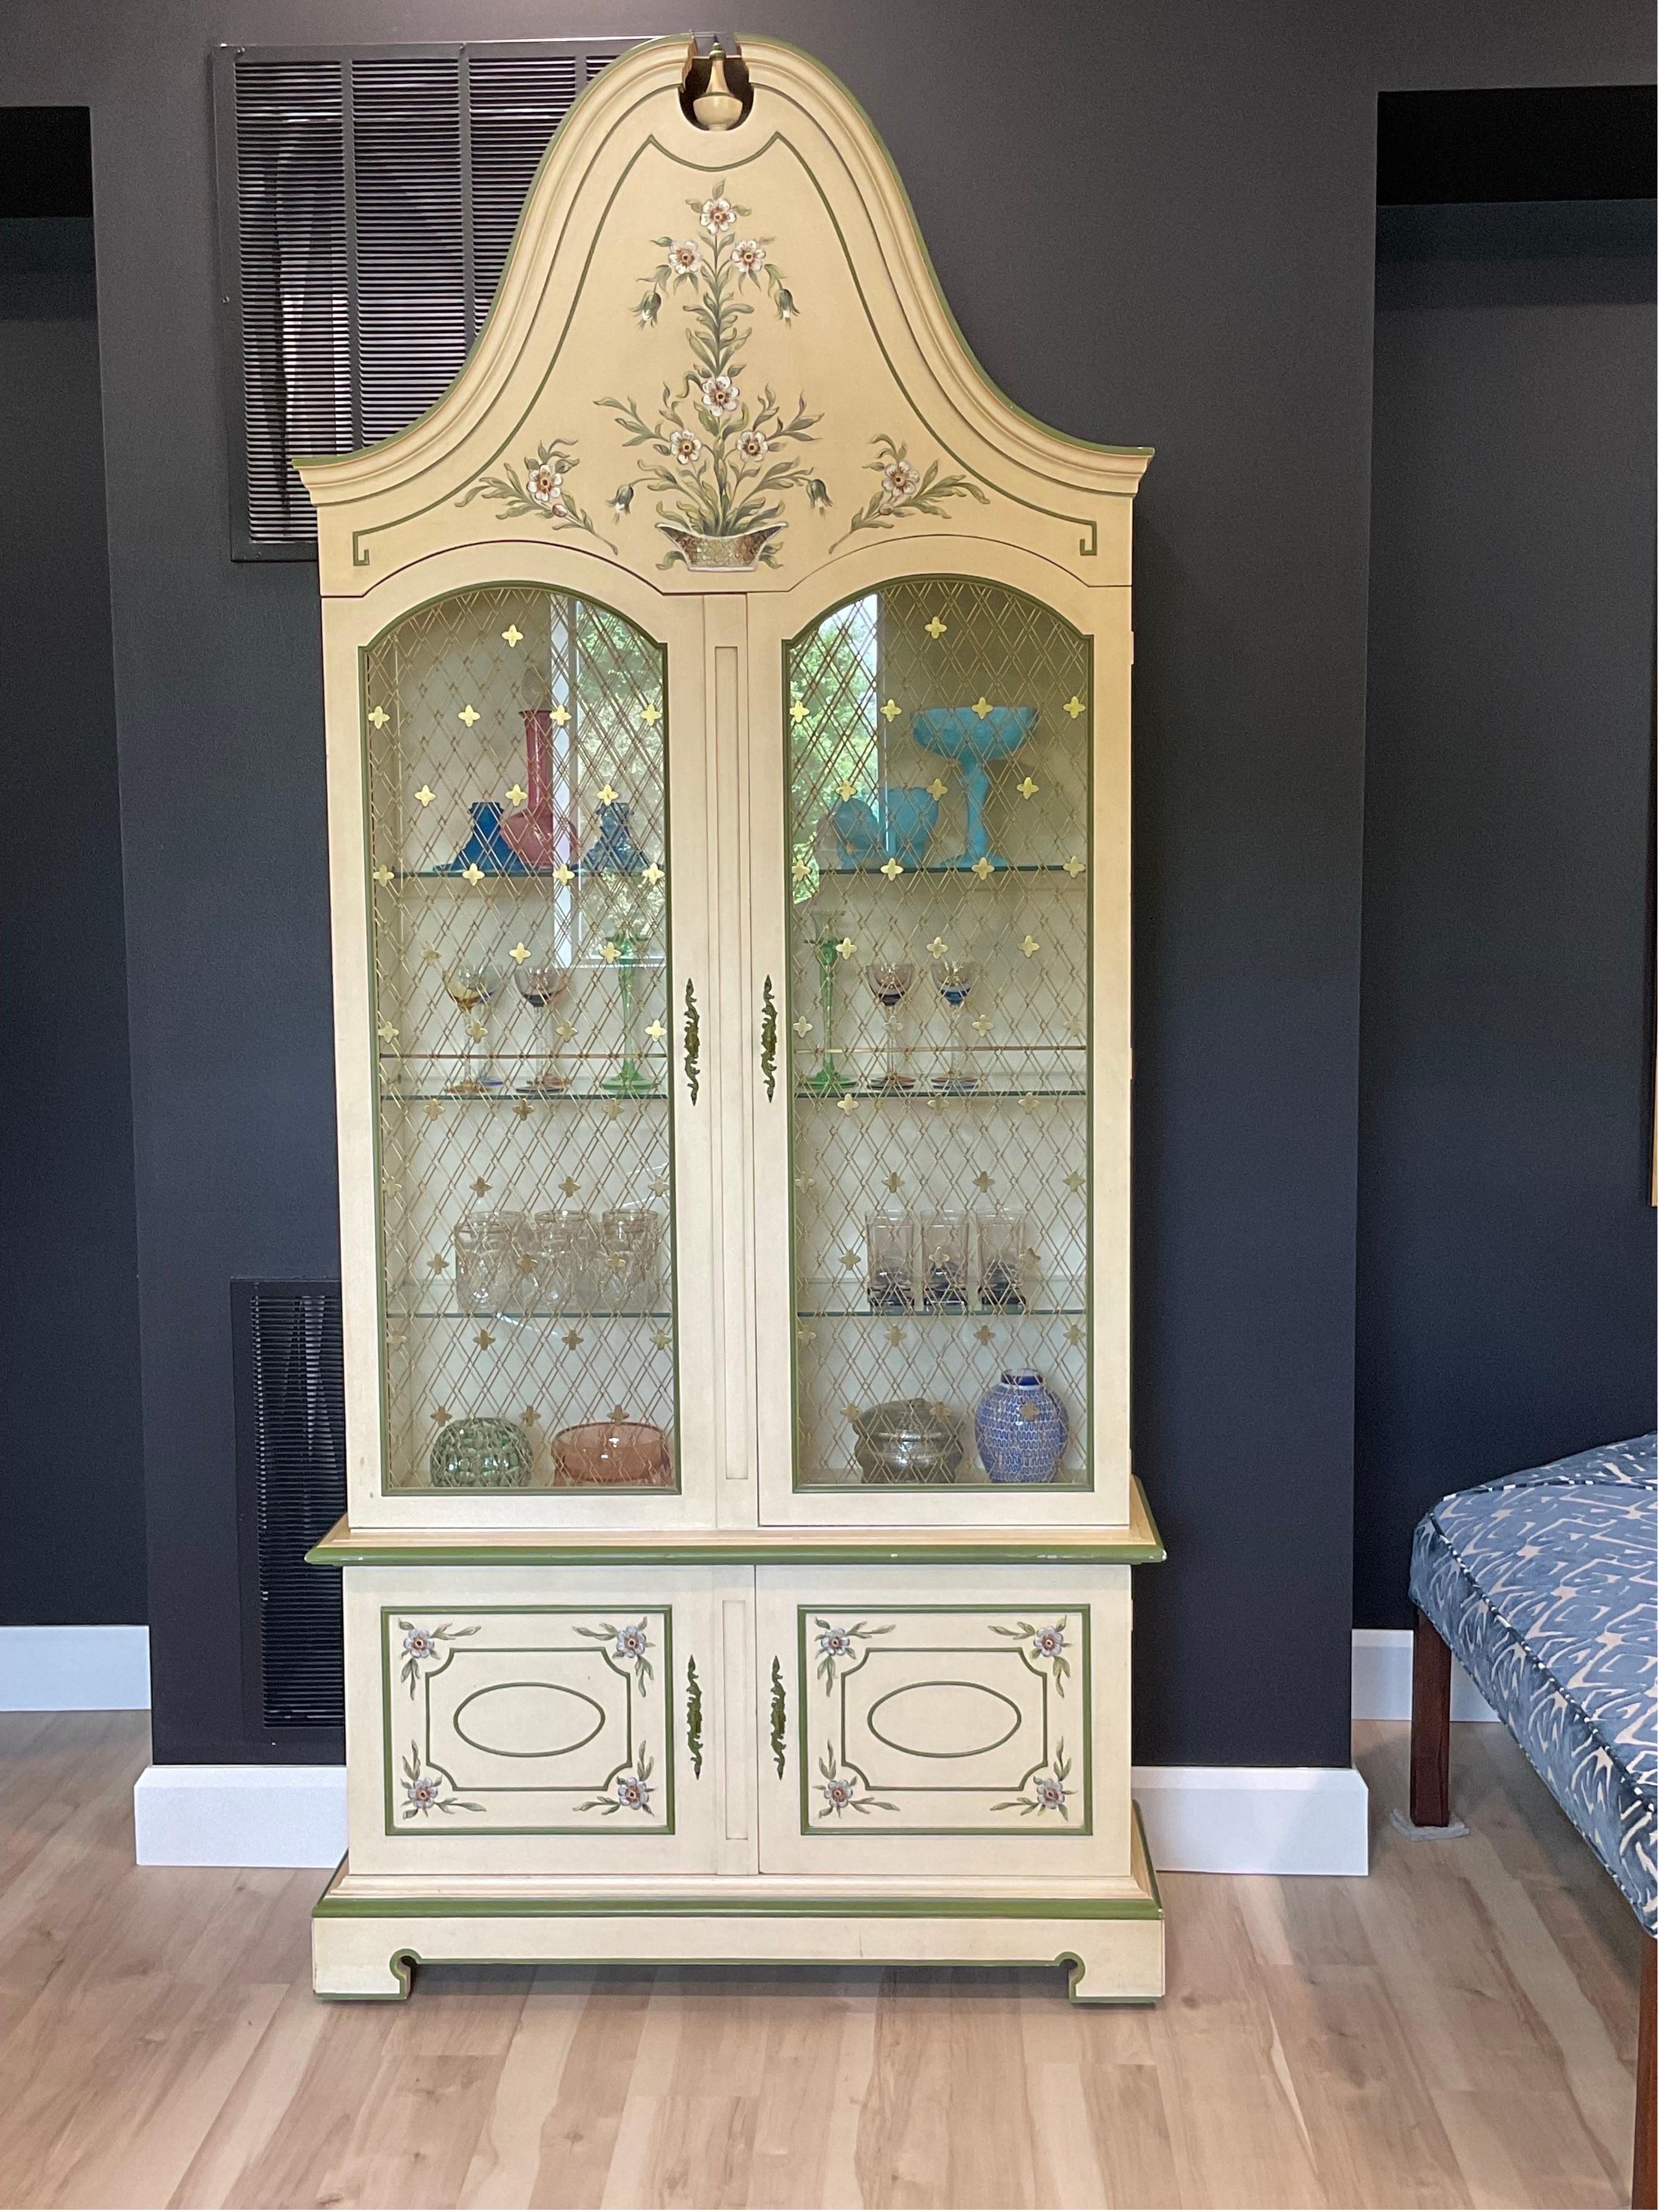 Very Rare John Widdicomb Bonnet top cabinet with glass shelving. Beautiful hand painted details, intricate brass grating and hand carvings. Original Finish. Beautiful piece of Widdicomb history, Circa 1960's. Fine Vintage condition with minimal